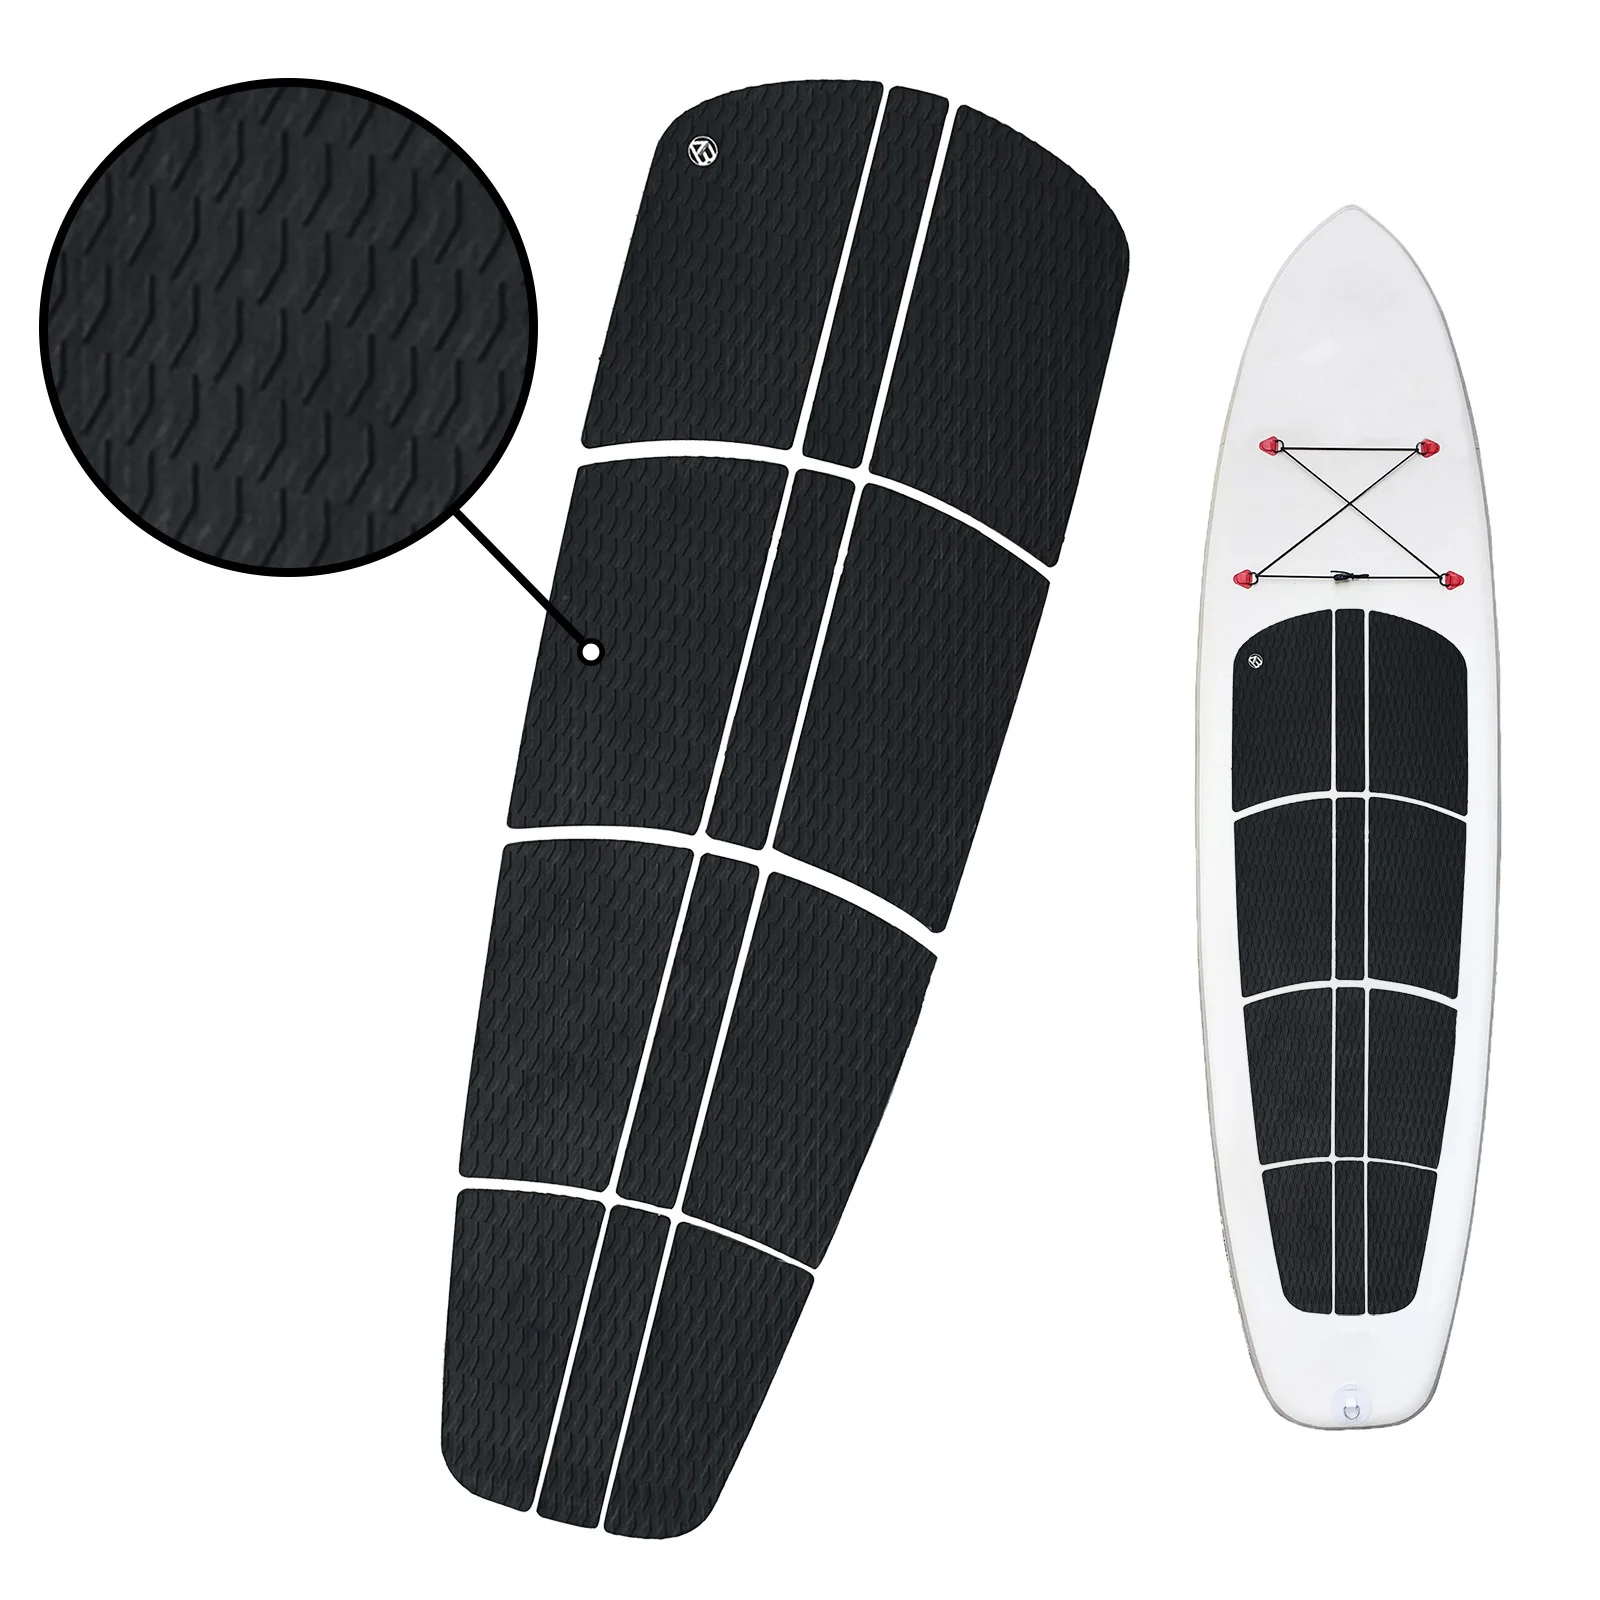 

AQUBONA 6/7/11/12 Piece Surf SUP Deck Traction Pad EVA Grip Foam Tail Pads 3M Adhesive for Longboard Paddleboard Surfboard